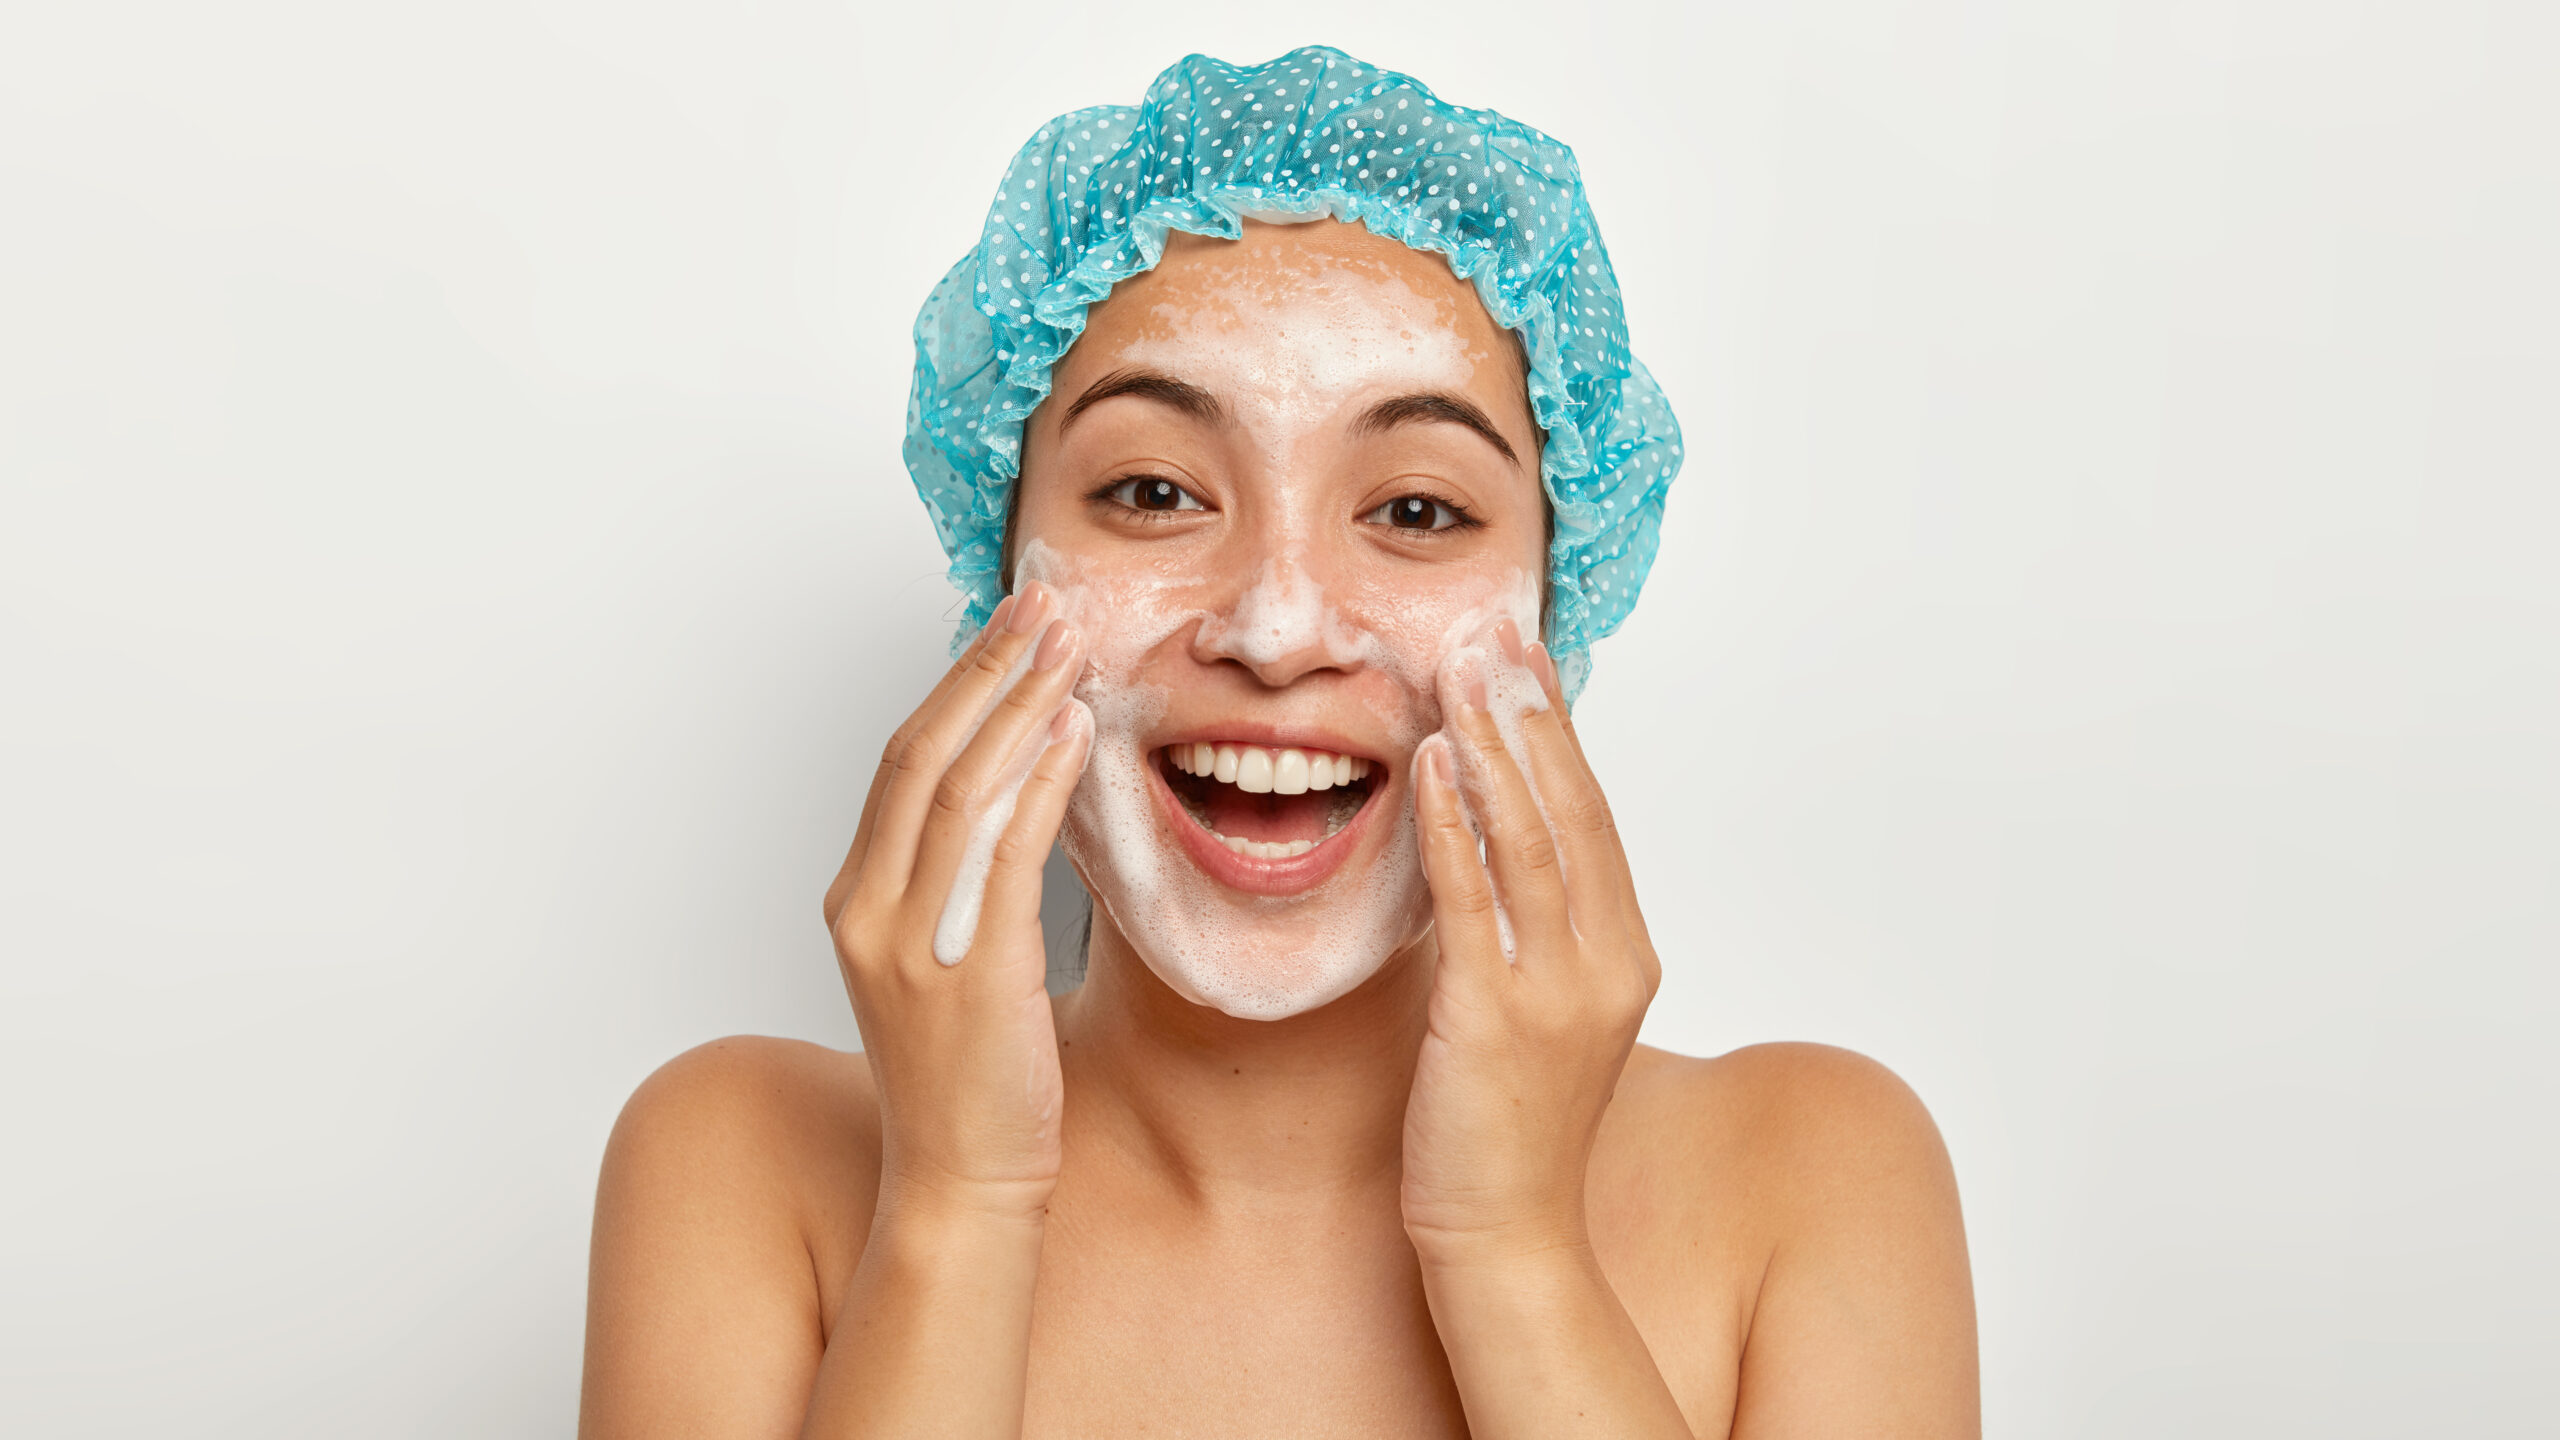 Photo of lovely female model with happy expression, washes face with foaming cleanser, wears wateproof showercap, pampers skin, stands shirtless, looks straightly at camera. Facial treatment